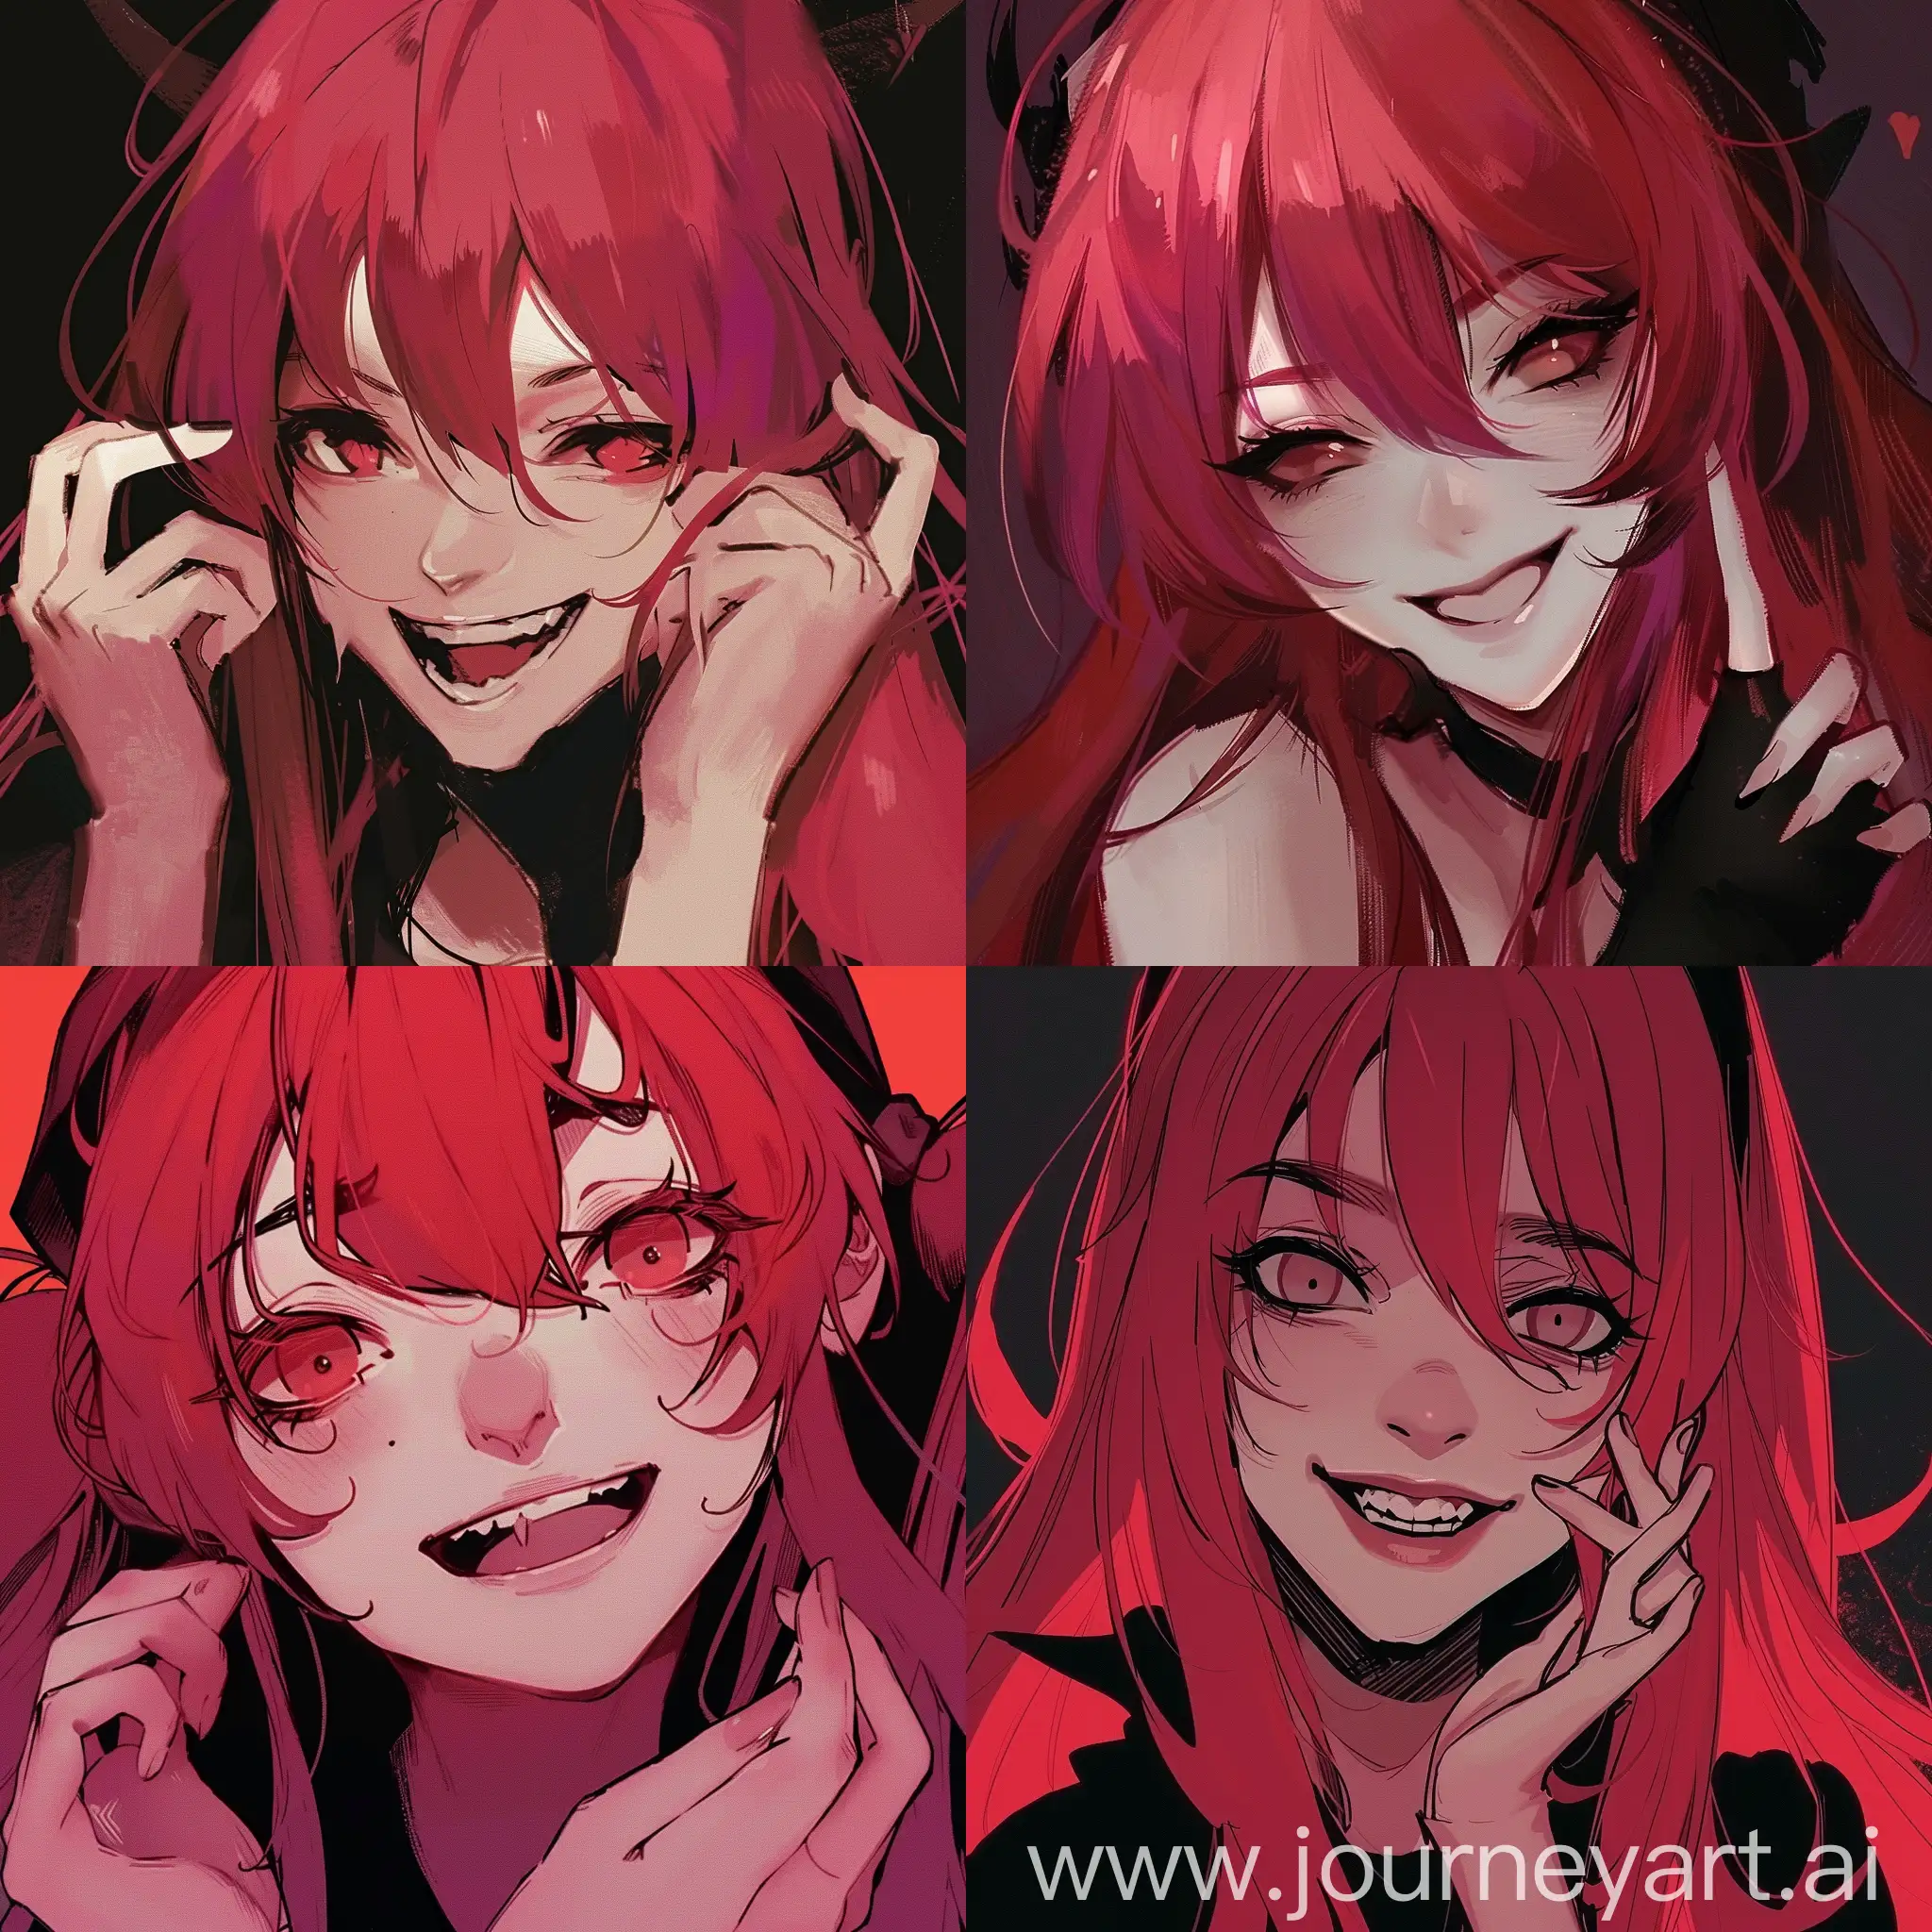 red hair girl, smile, satanic, "normal hands", normal eyes, normal mouth